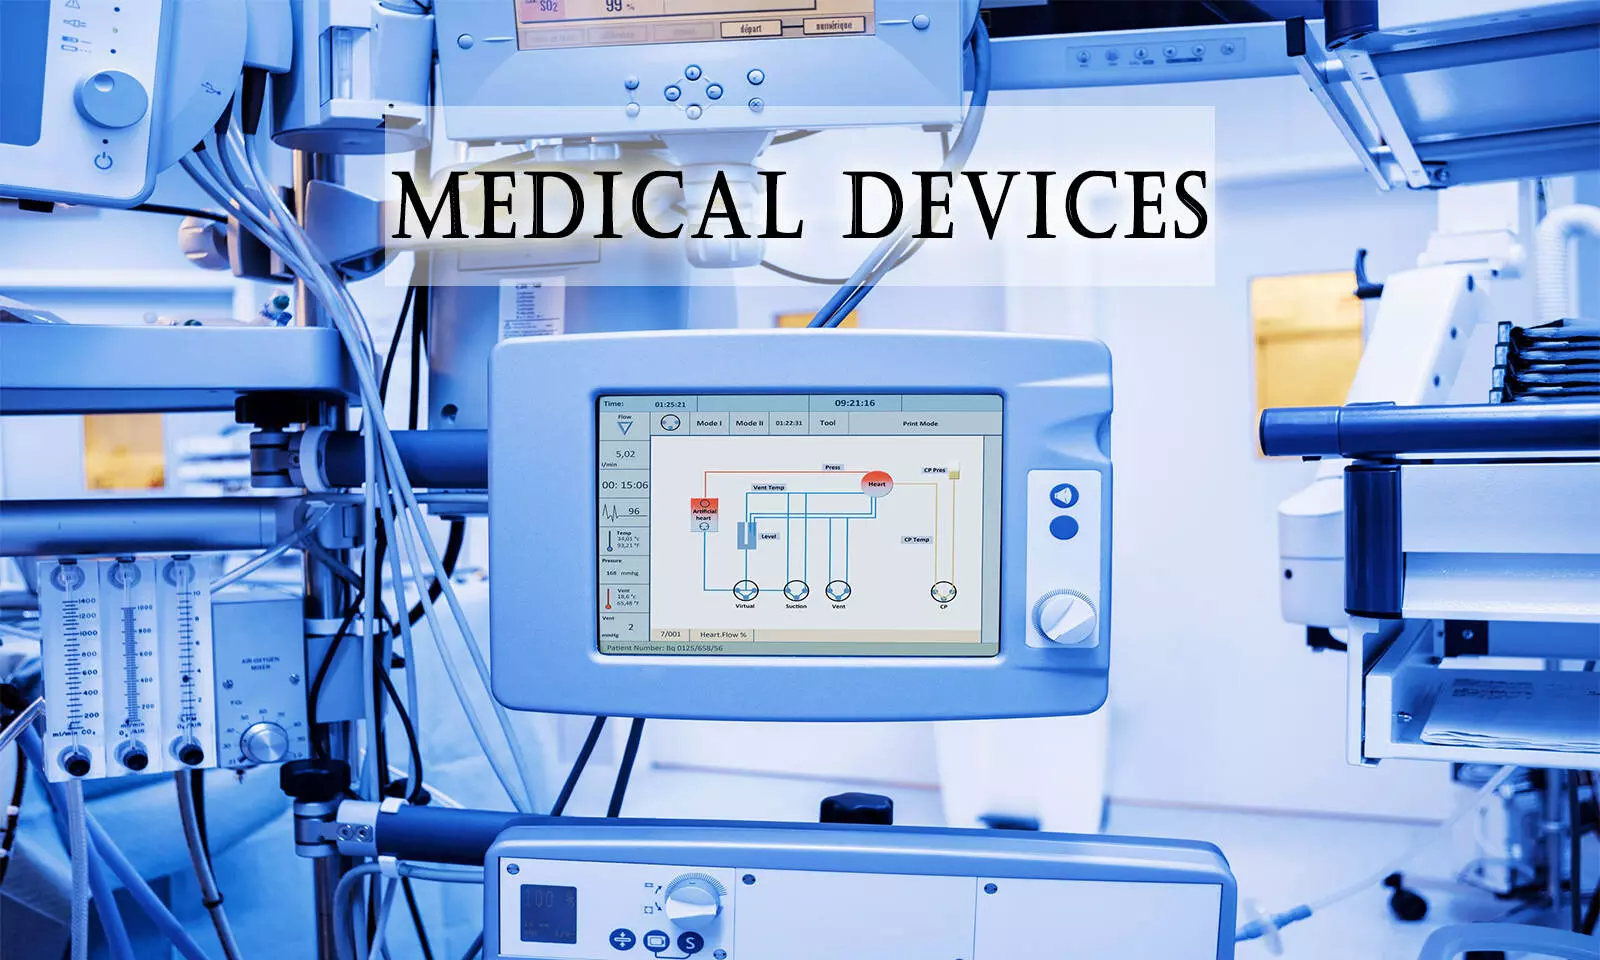 AiMed reports increased growth rate of Indian medical device industry during Covid-19